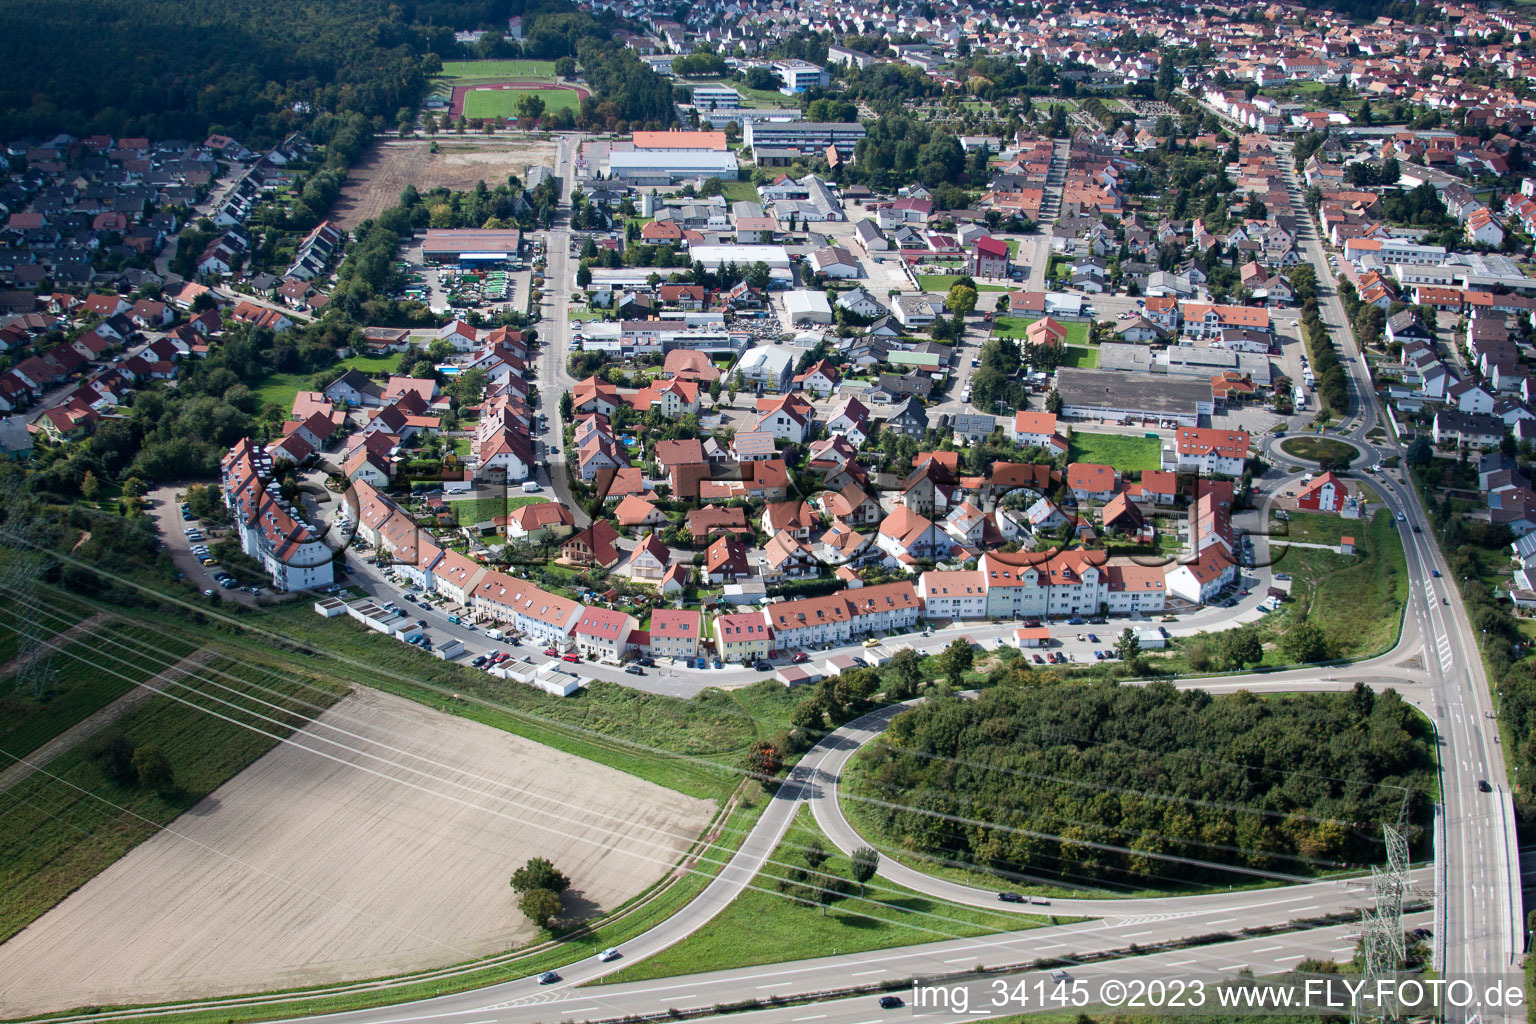 Drone image of Rülzheim in the state Rhineland-Palatinate, Germany